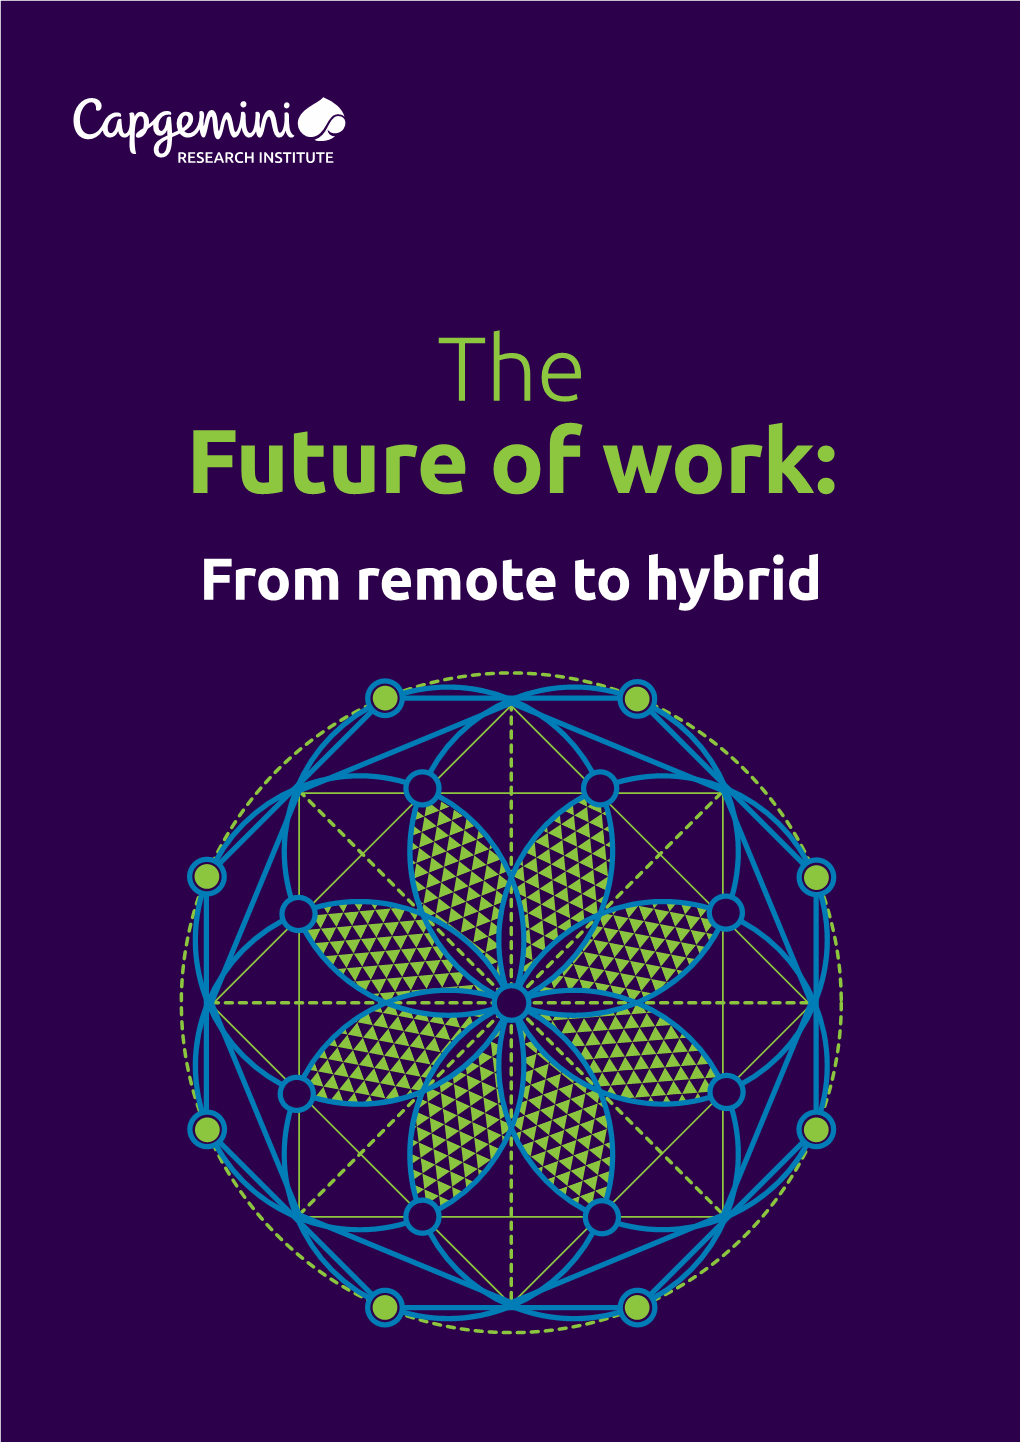 The Future of Work: from Remote to Hybrid Introduction